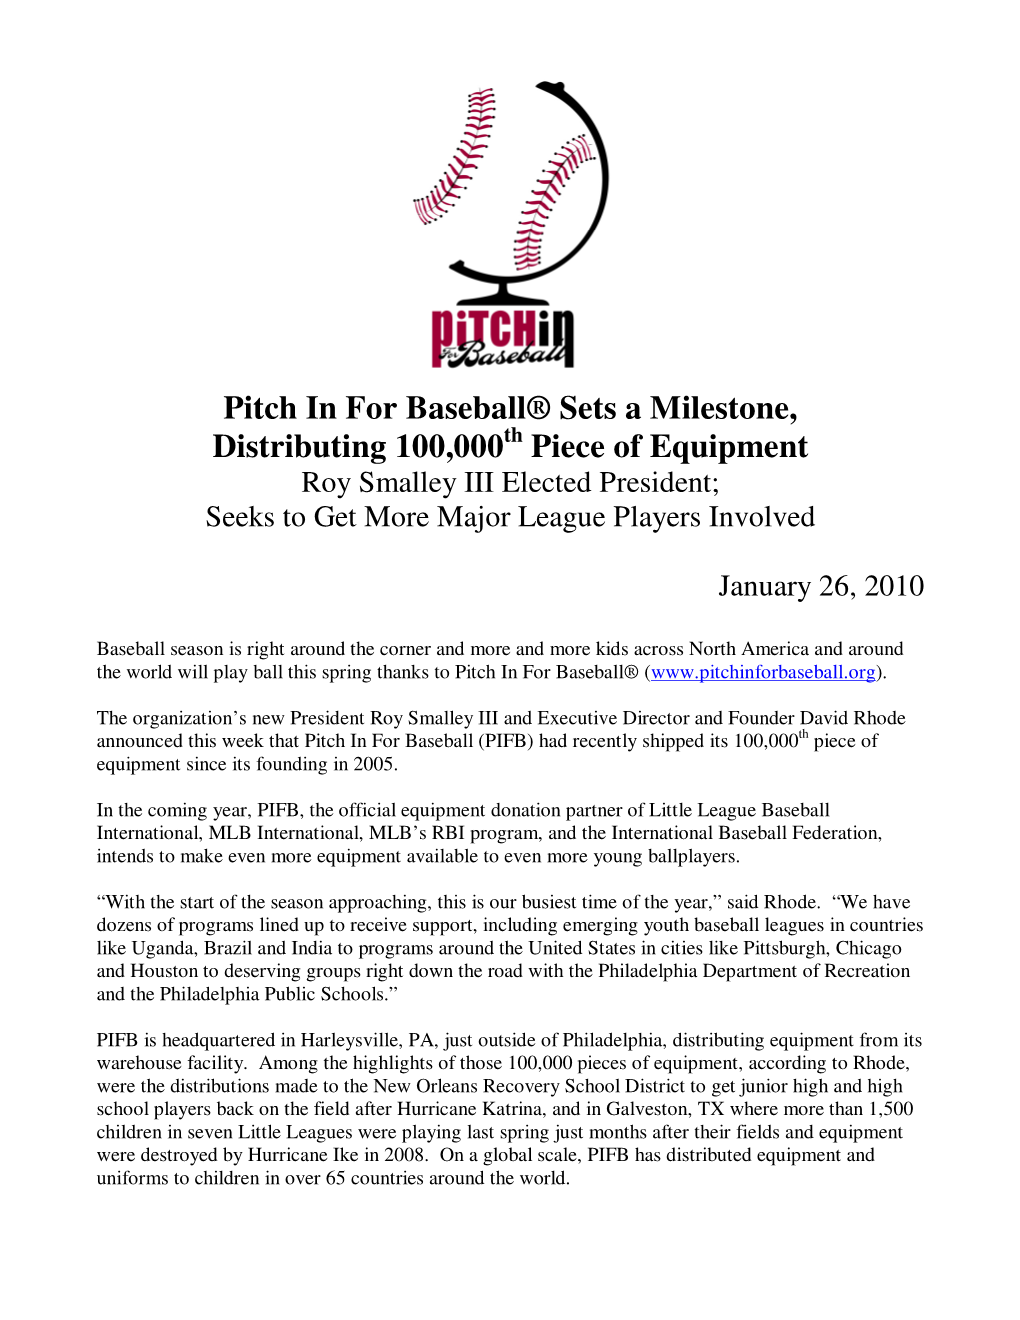 Pitch in for Baseball® Sets a Milestone, Distributing 100000